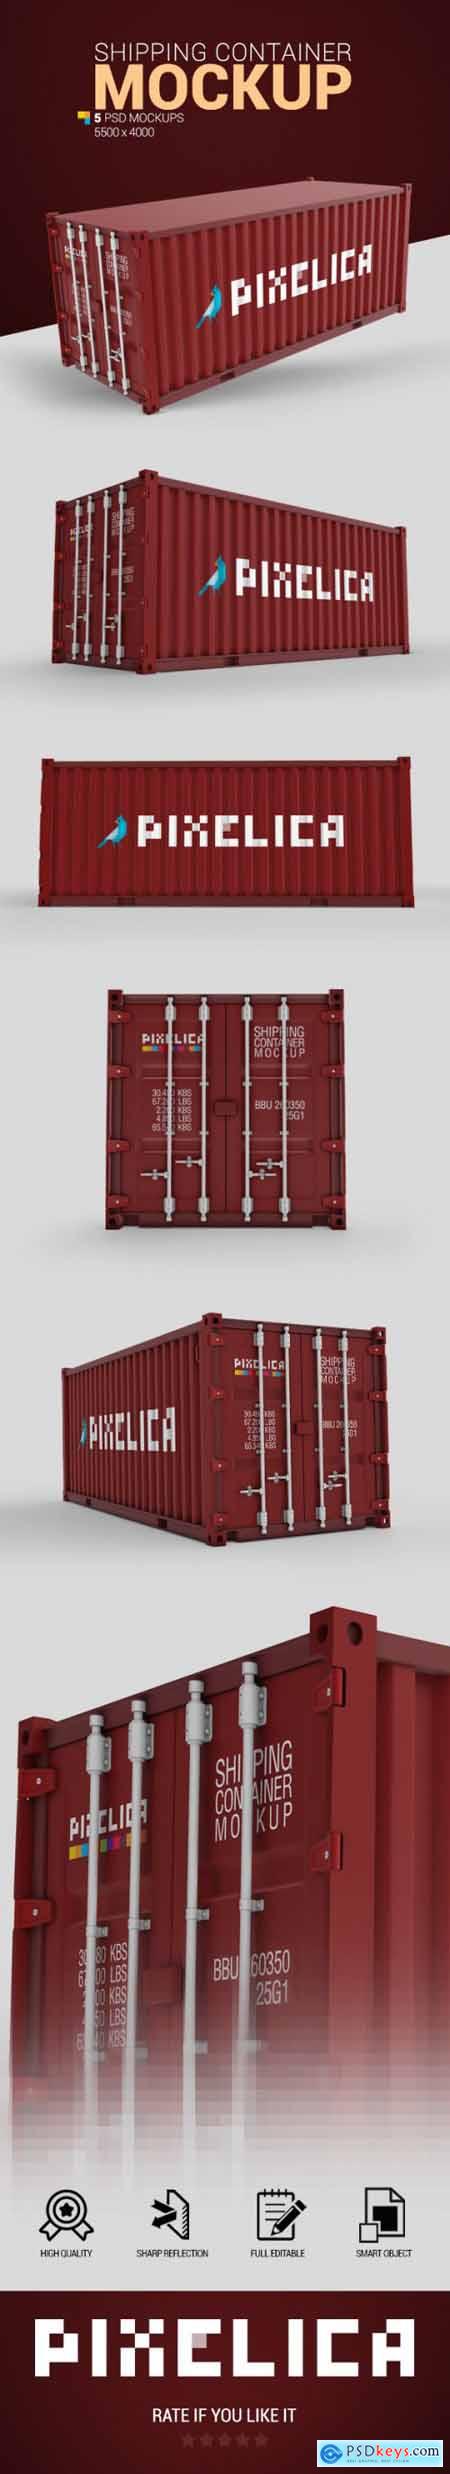 Shipping Container Mockup » Free Download Photoshop Vector Stock image Via Torrent Zippyshare ...